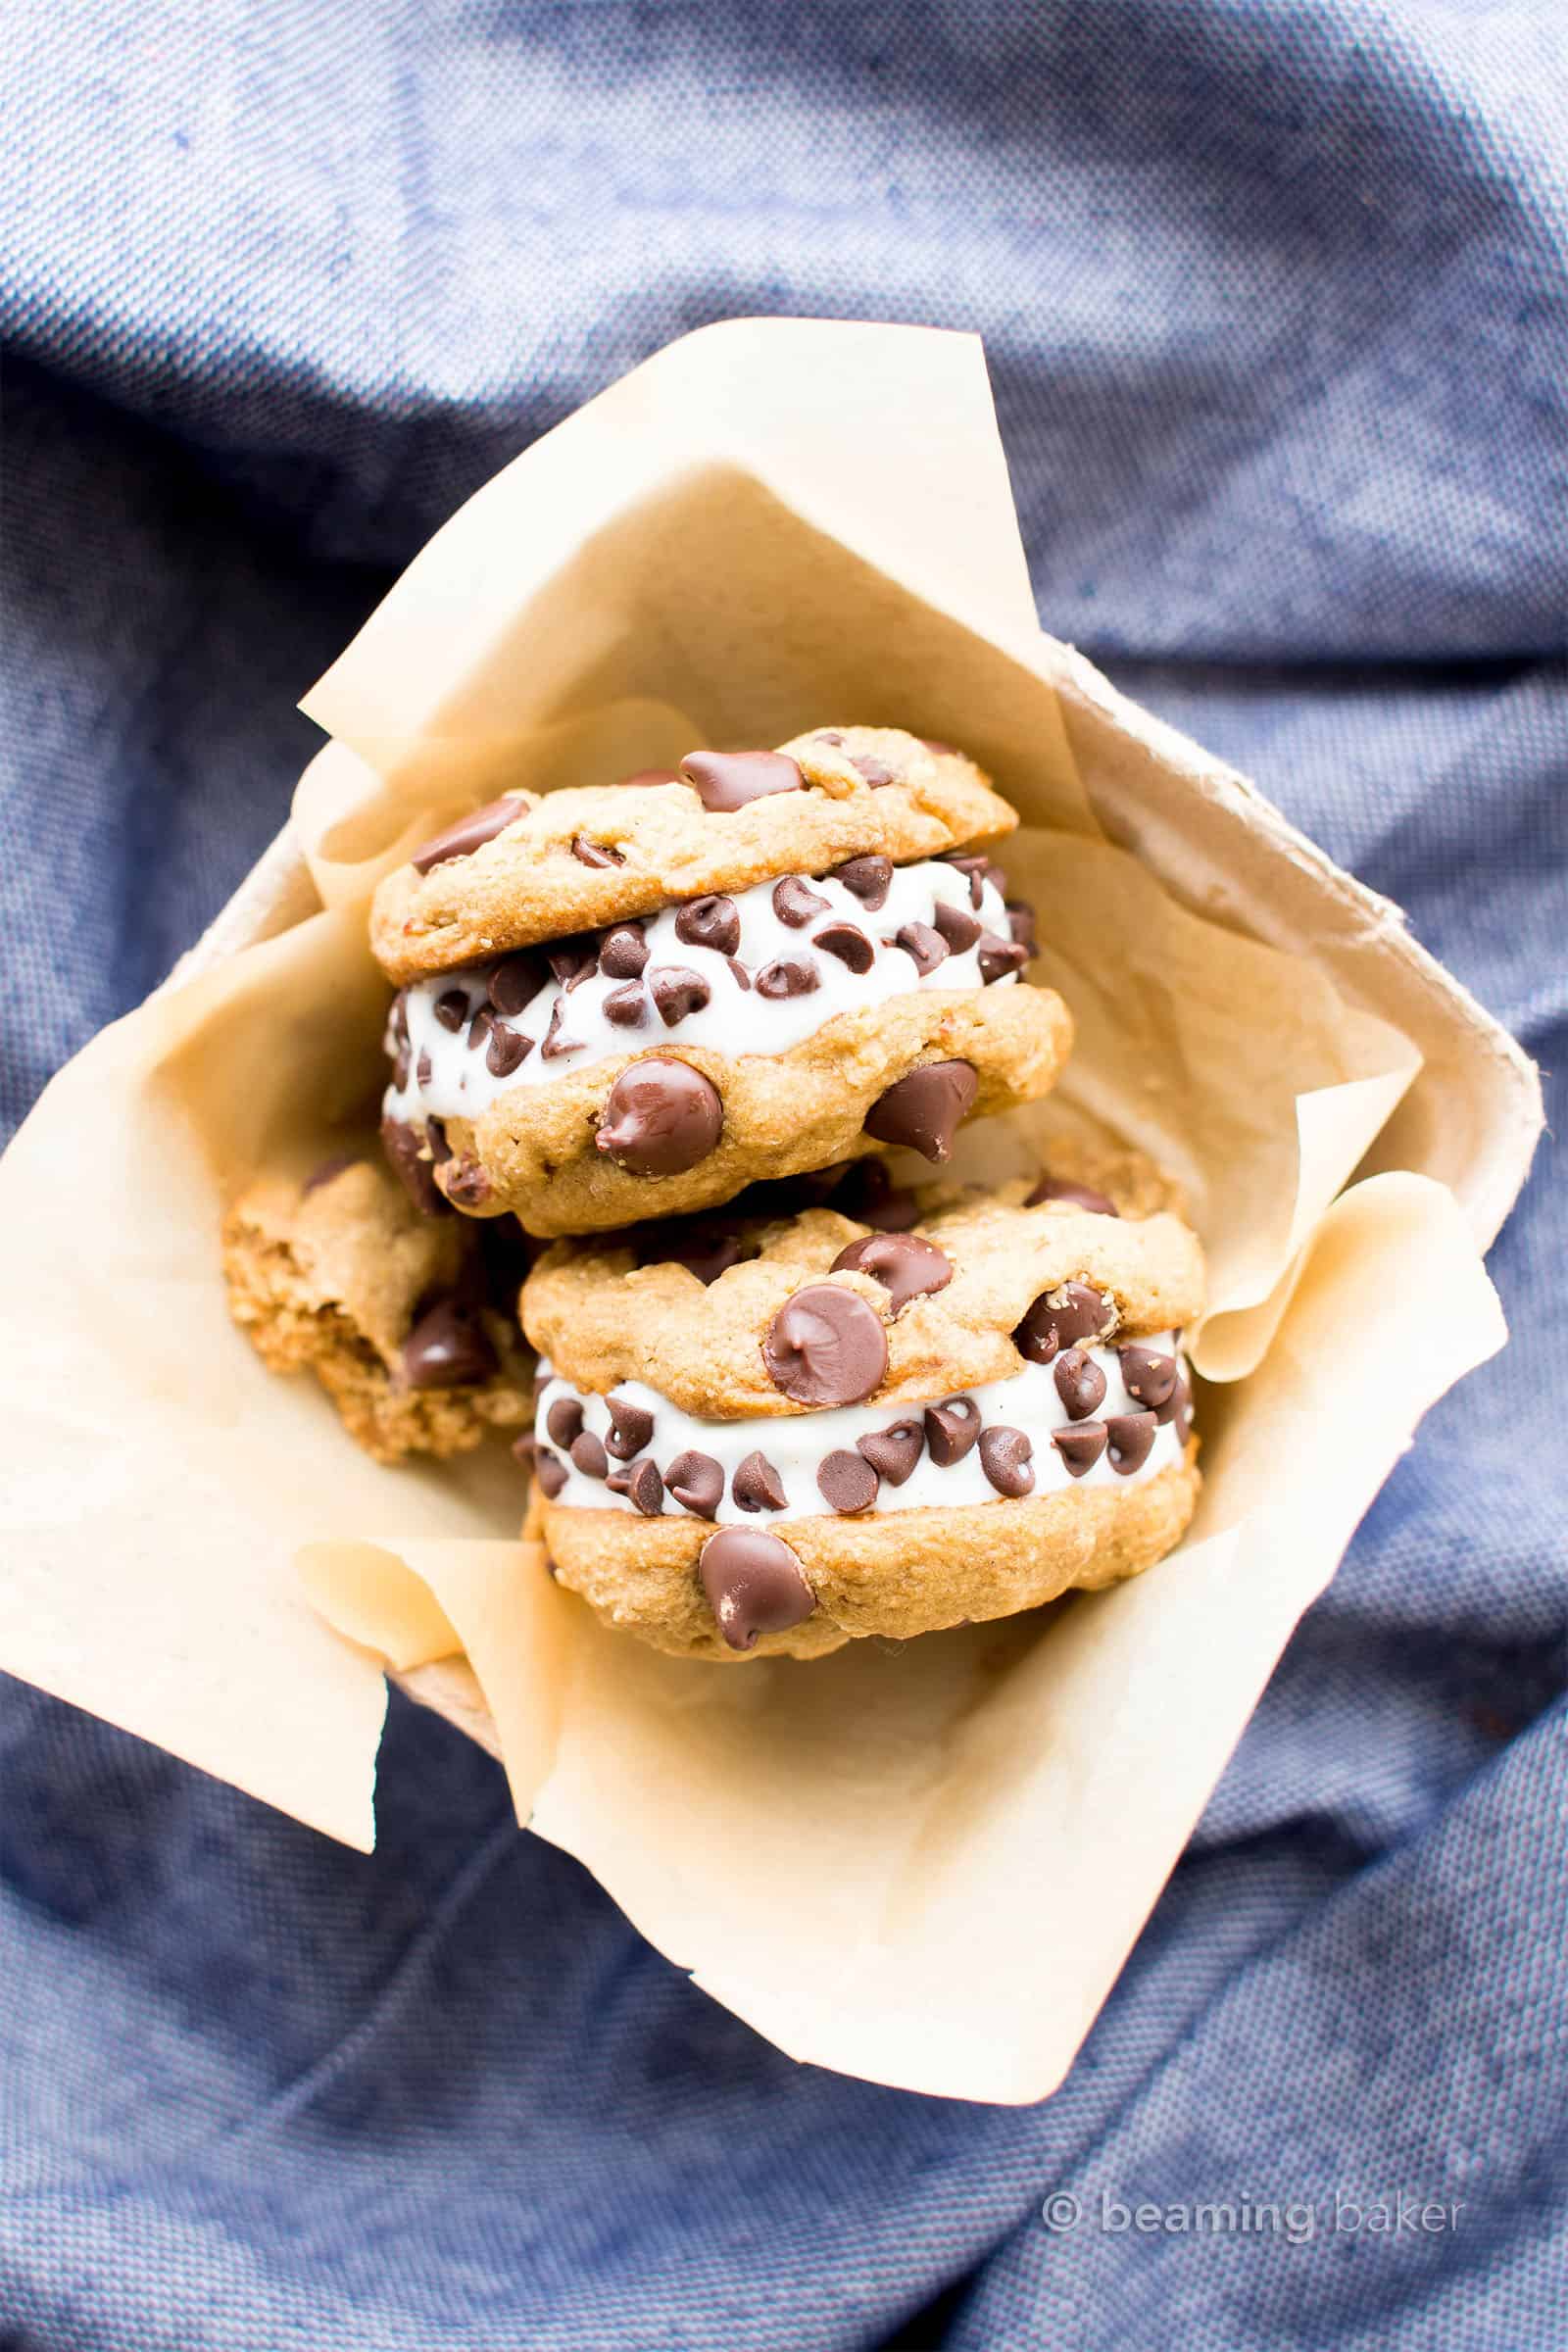 Vegan Ice Cream Sandwiches (GF): soft-baked gluten free chocolate chip cookies sandwich a thick layer of delicious creamy vegan ice cream. The best gluten free ice cream sandwiches! #Vegan #GlutenFree #IceCreamSandwiches #IceCream | Recipe at BeamingBaker.com